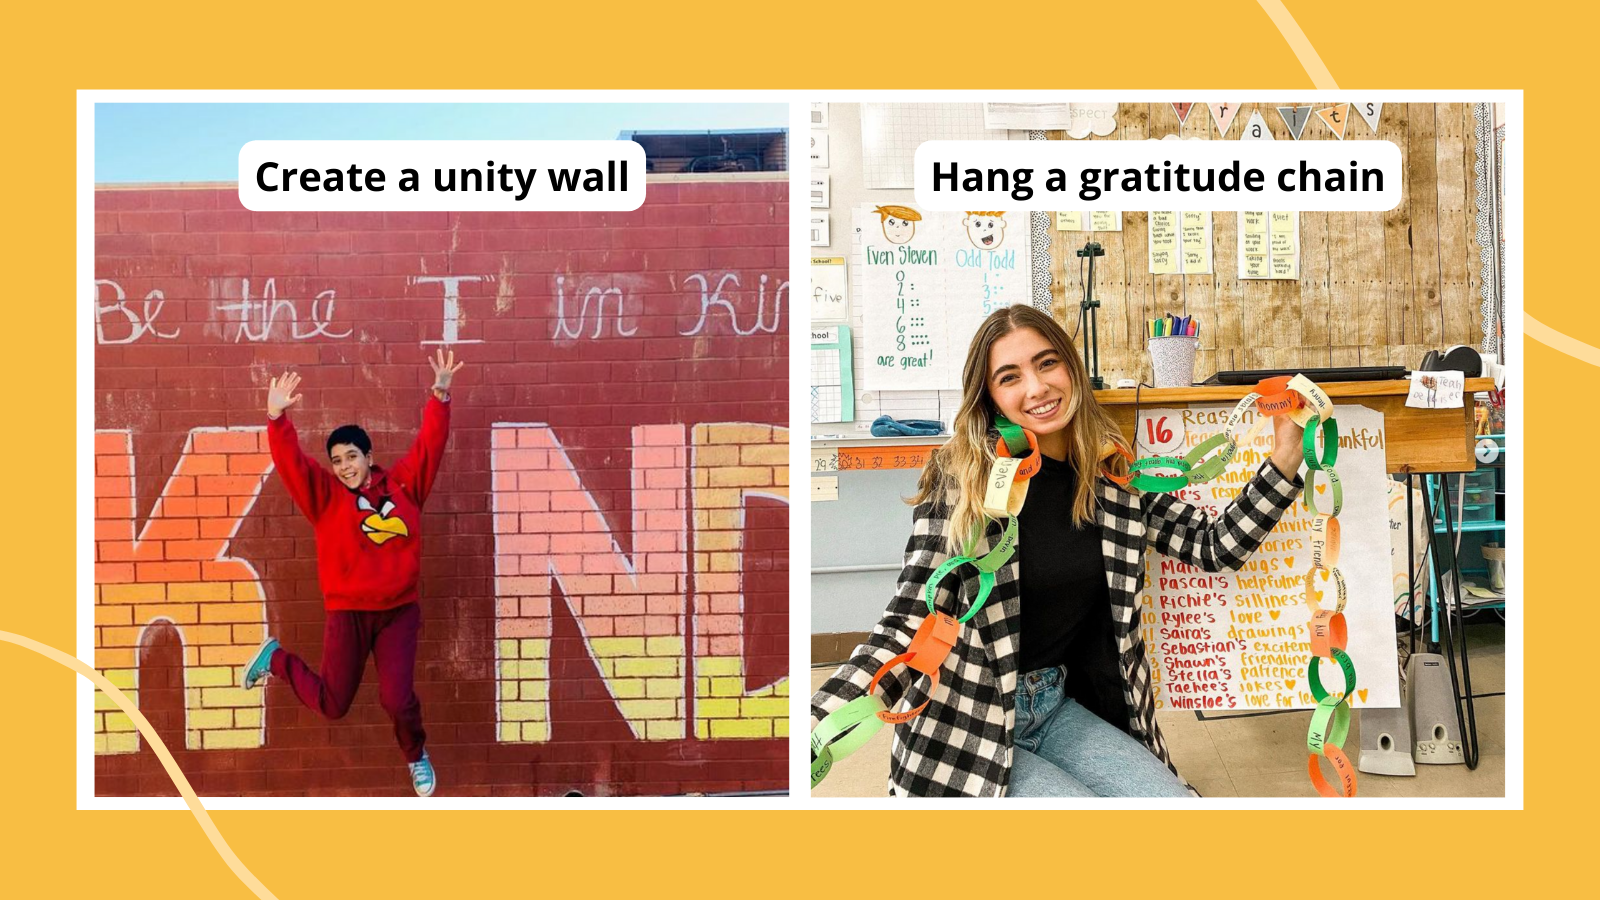 Examples of school spirit ideas for student council including creating a unity wall and hanging a gratitude chain.